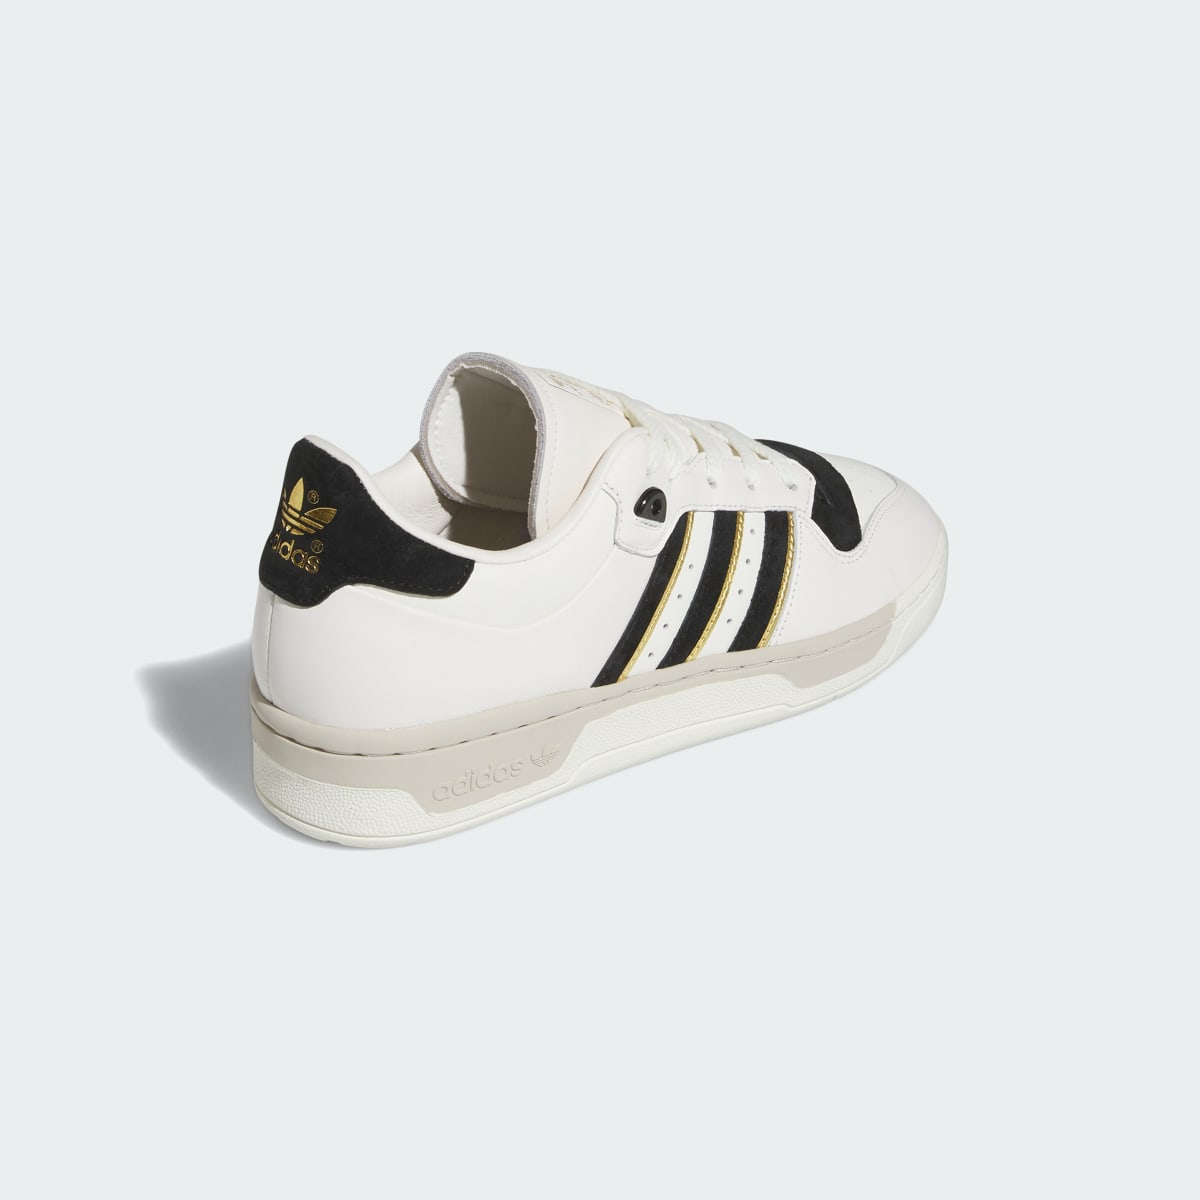 Adidas Chaussure Rivalry 86 Low. 6